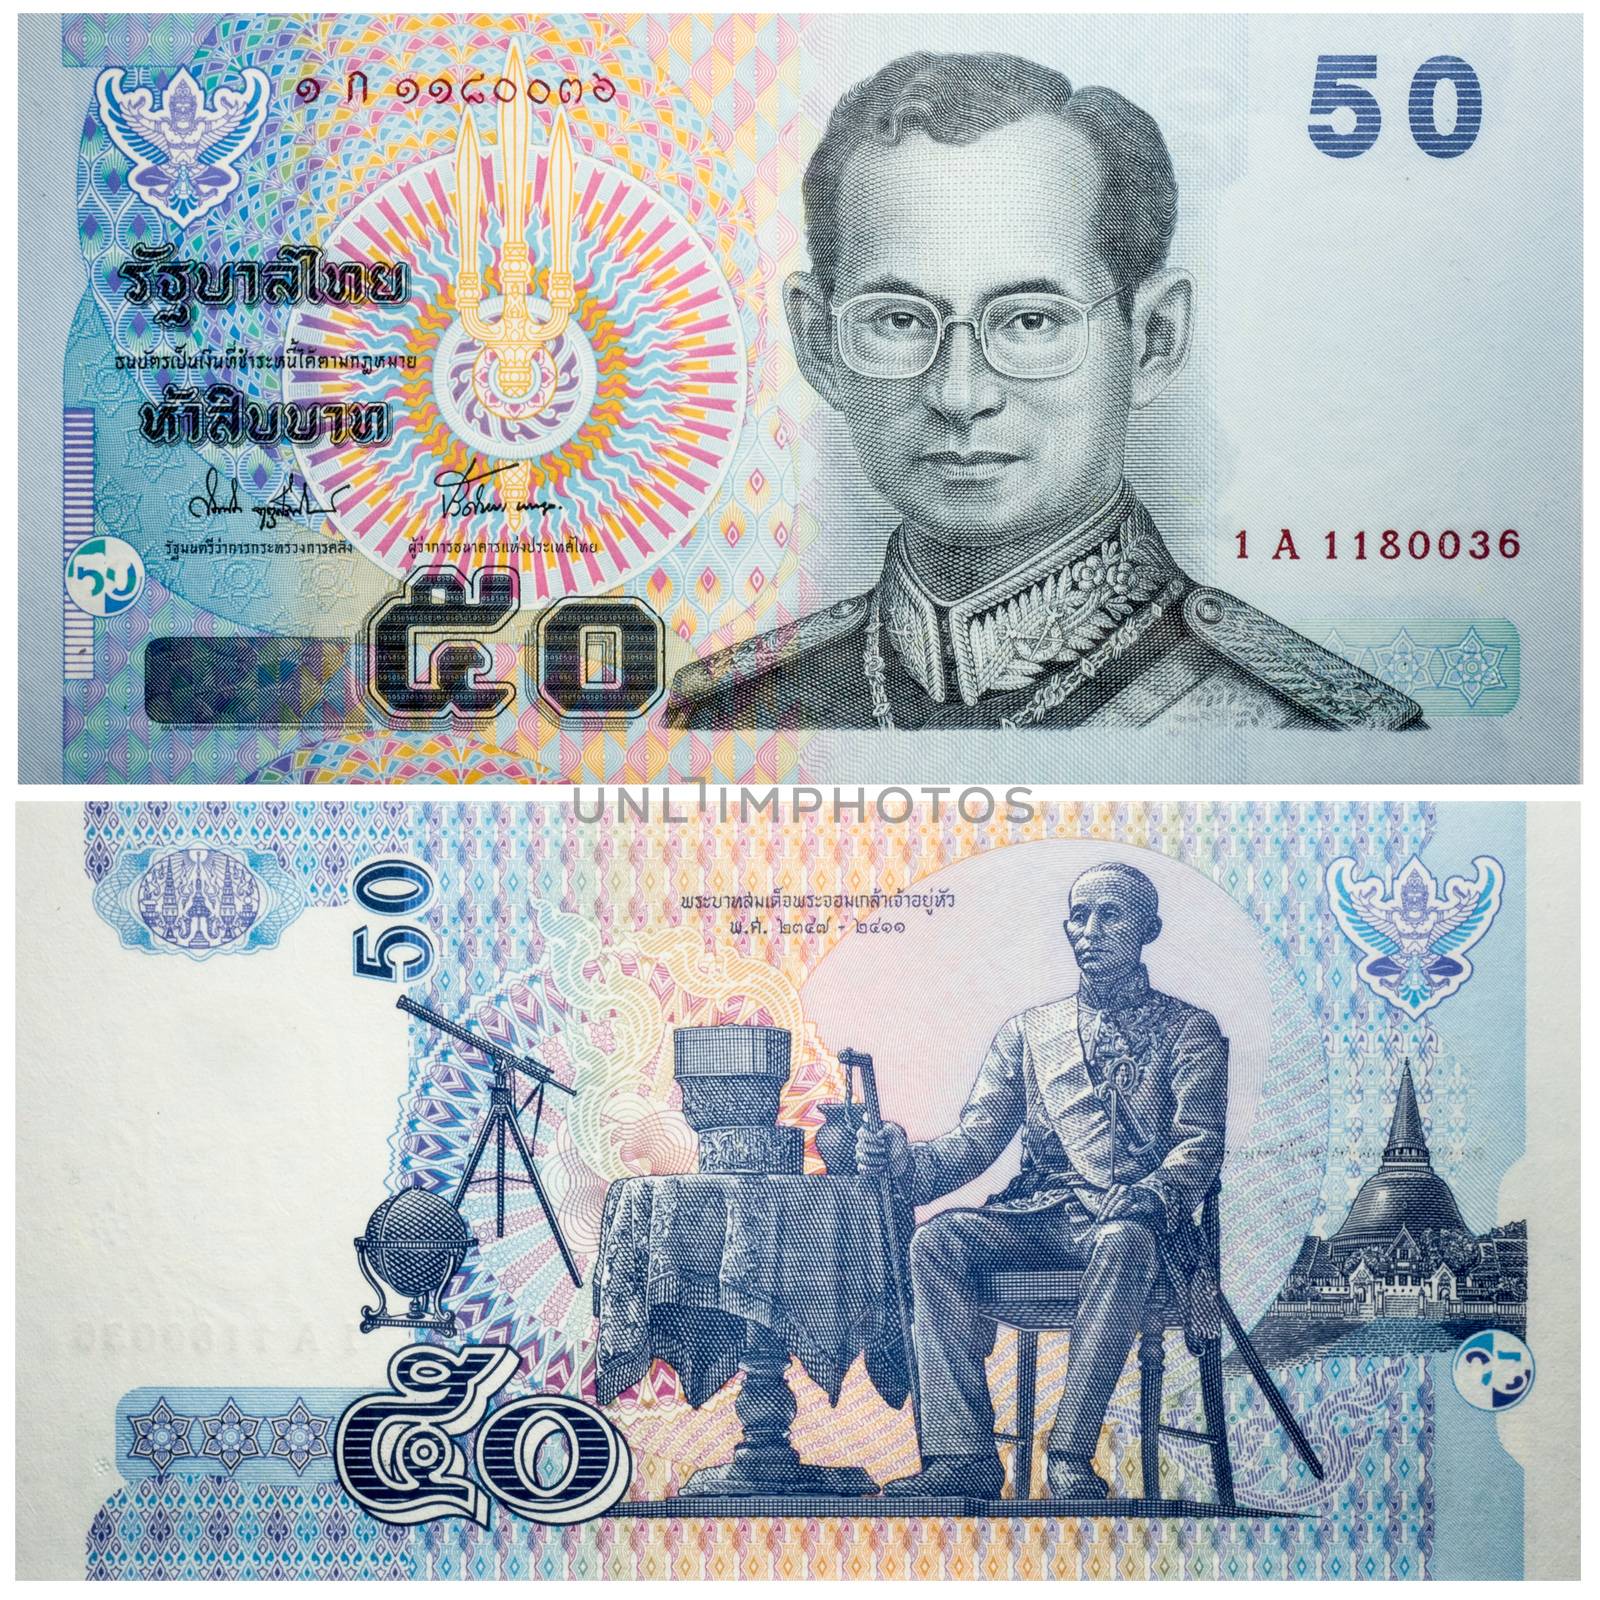 Banknote 50 Baht Thailand 2004 by rigamondis